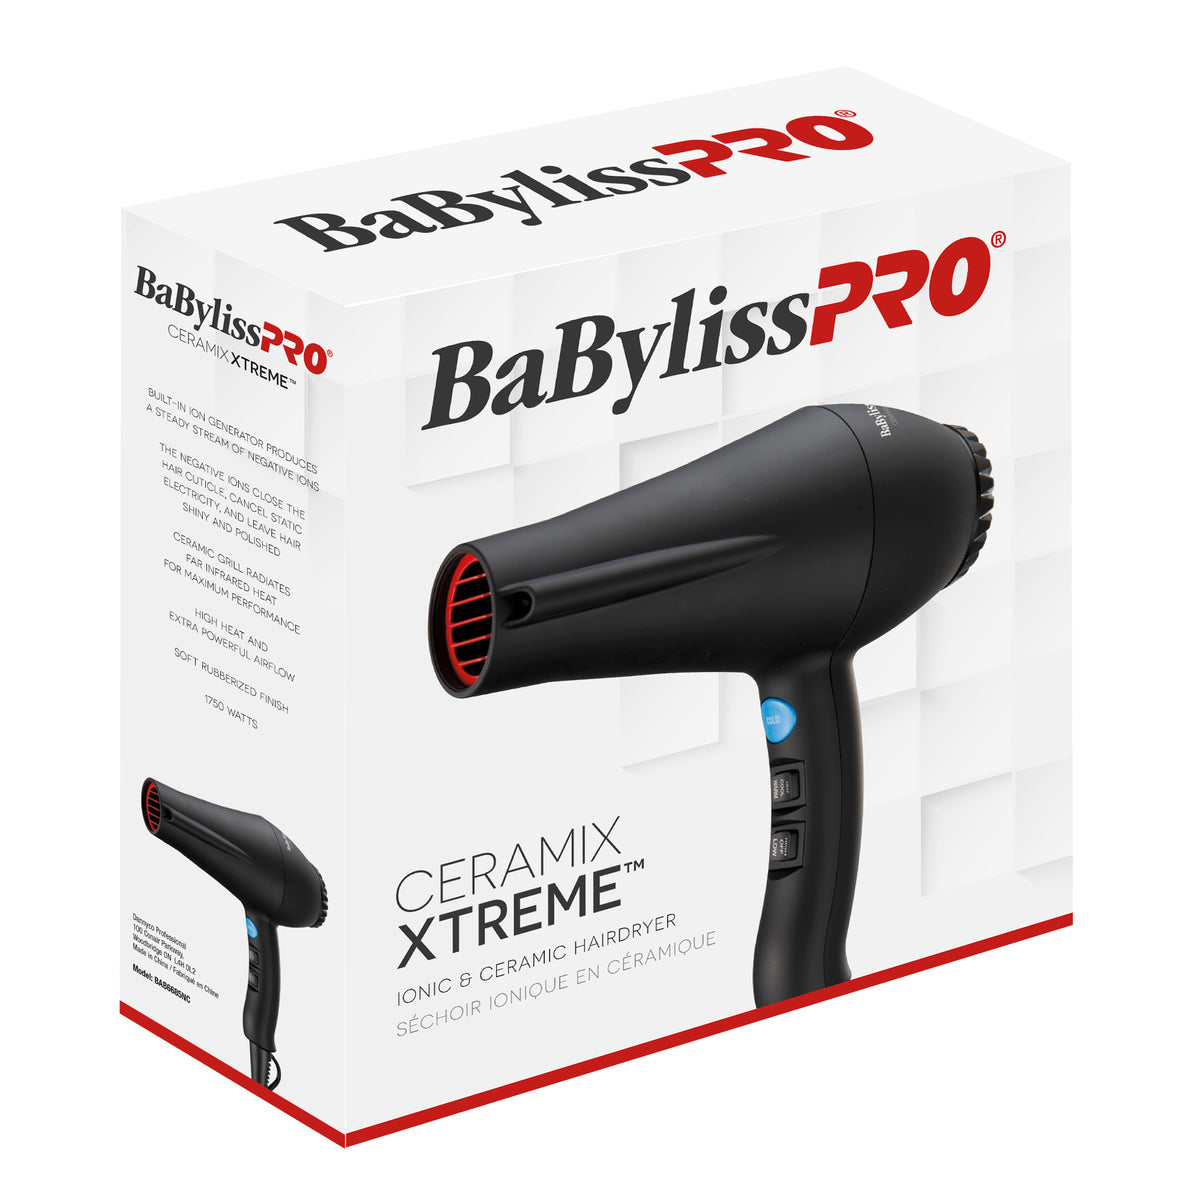 BaBylissPRO lonic and Ceramic Hairdryer